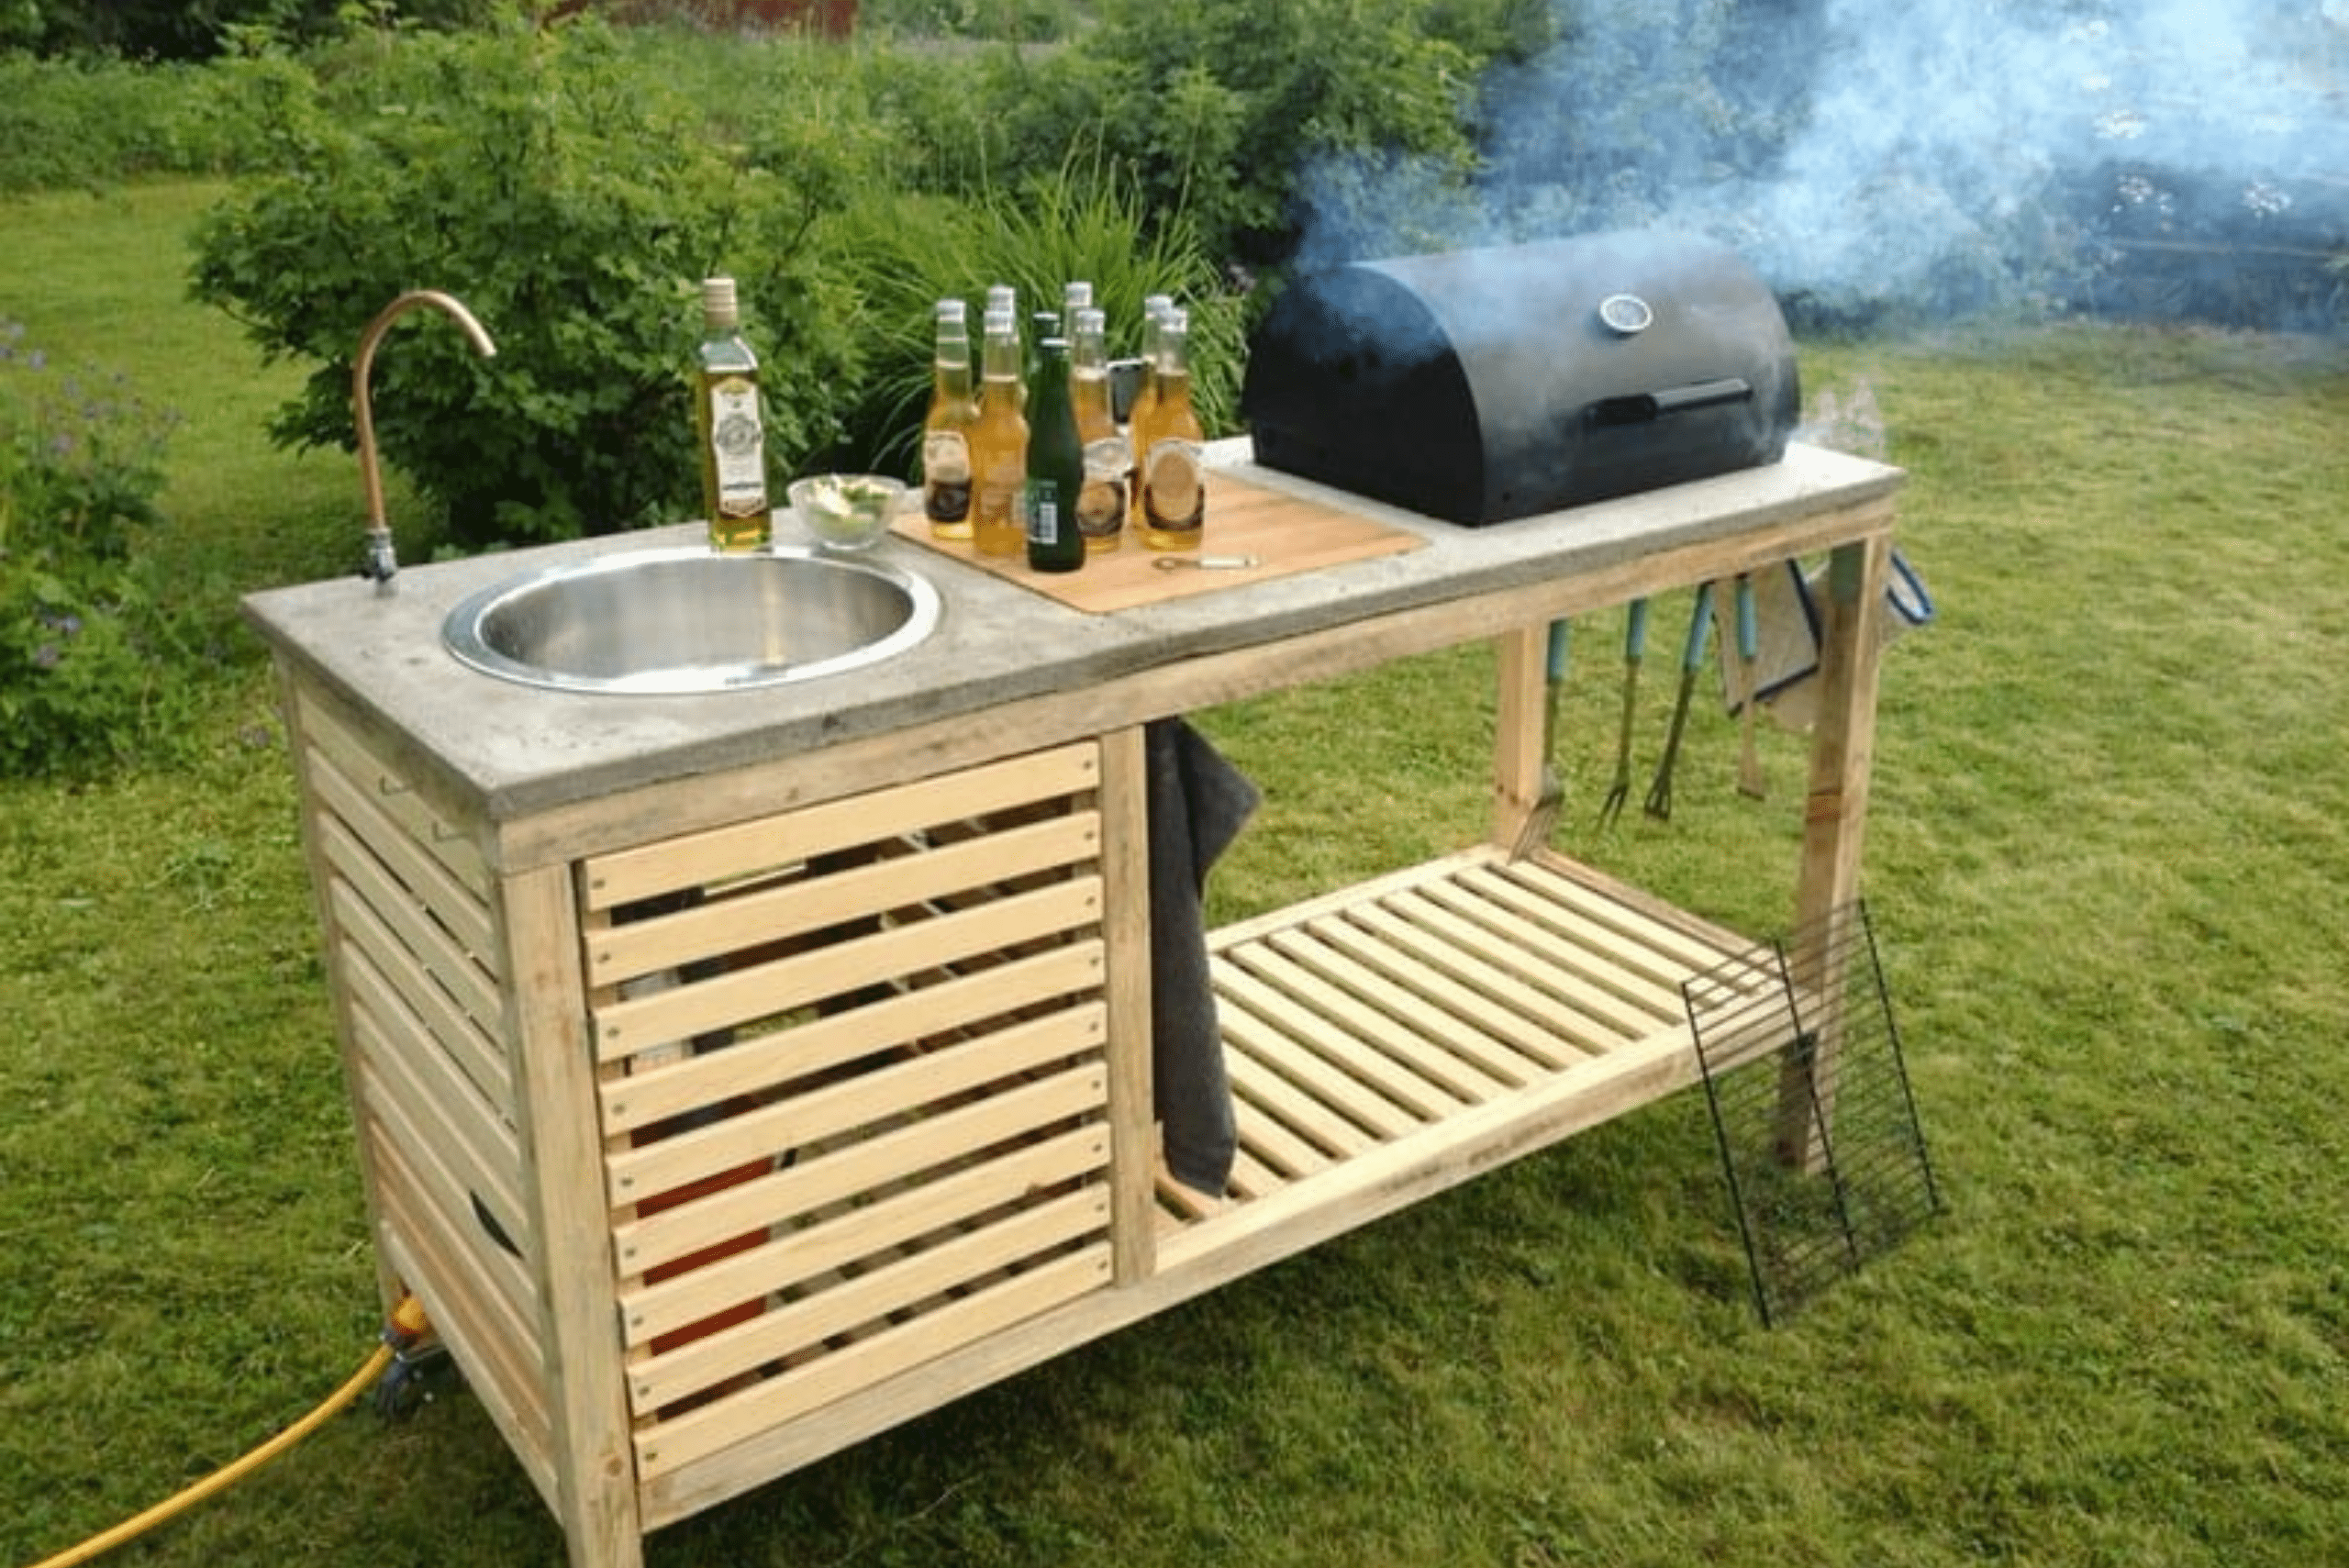 A portable grill station made of wood and has a built-in sink and grill.